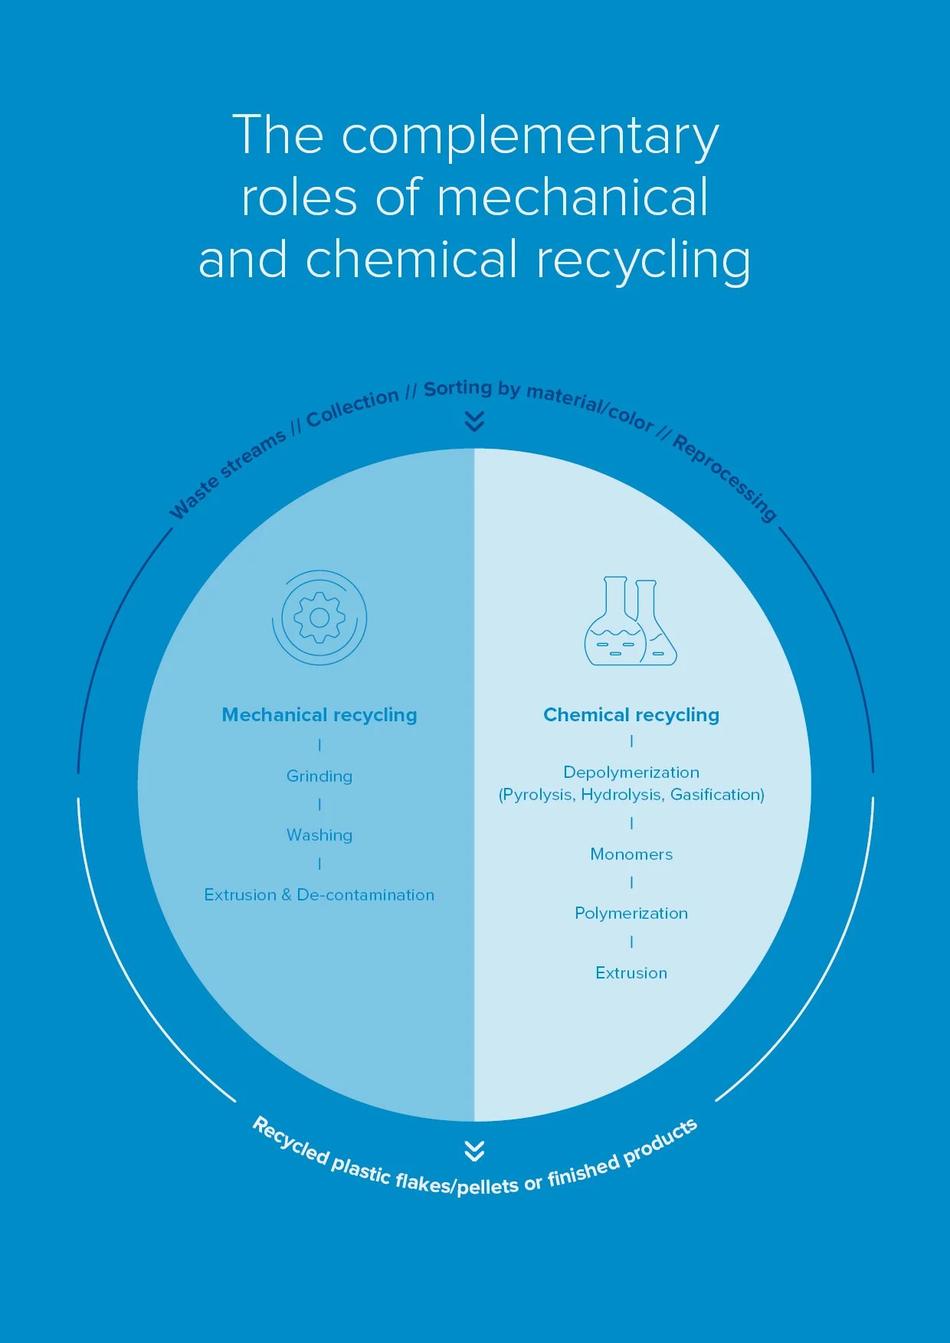 Complementary roles of mechanical and chemical recycling infographic